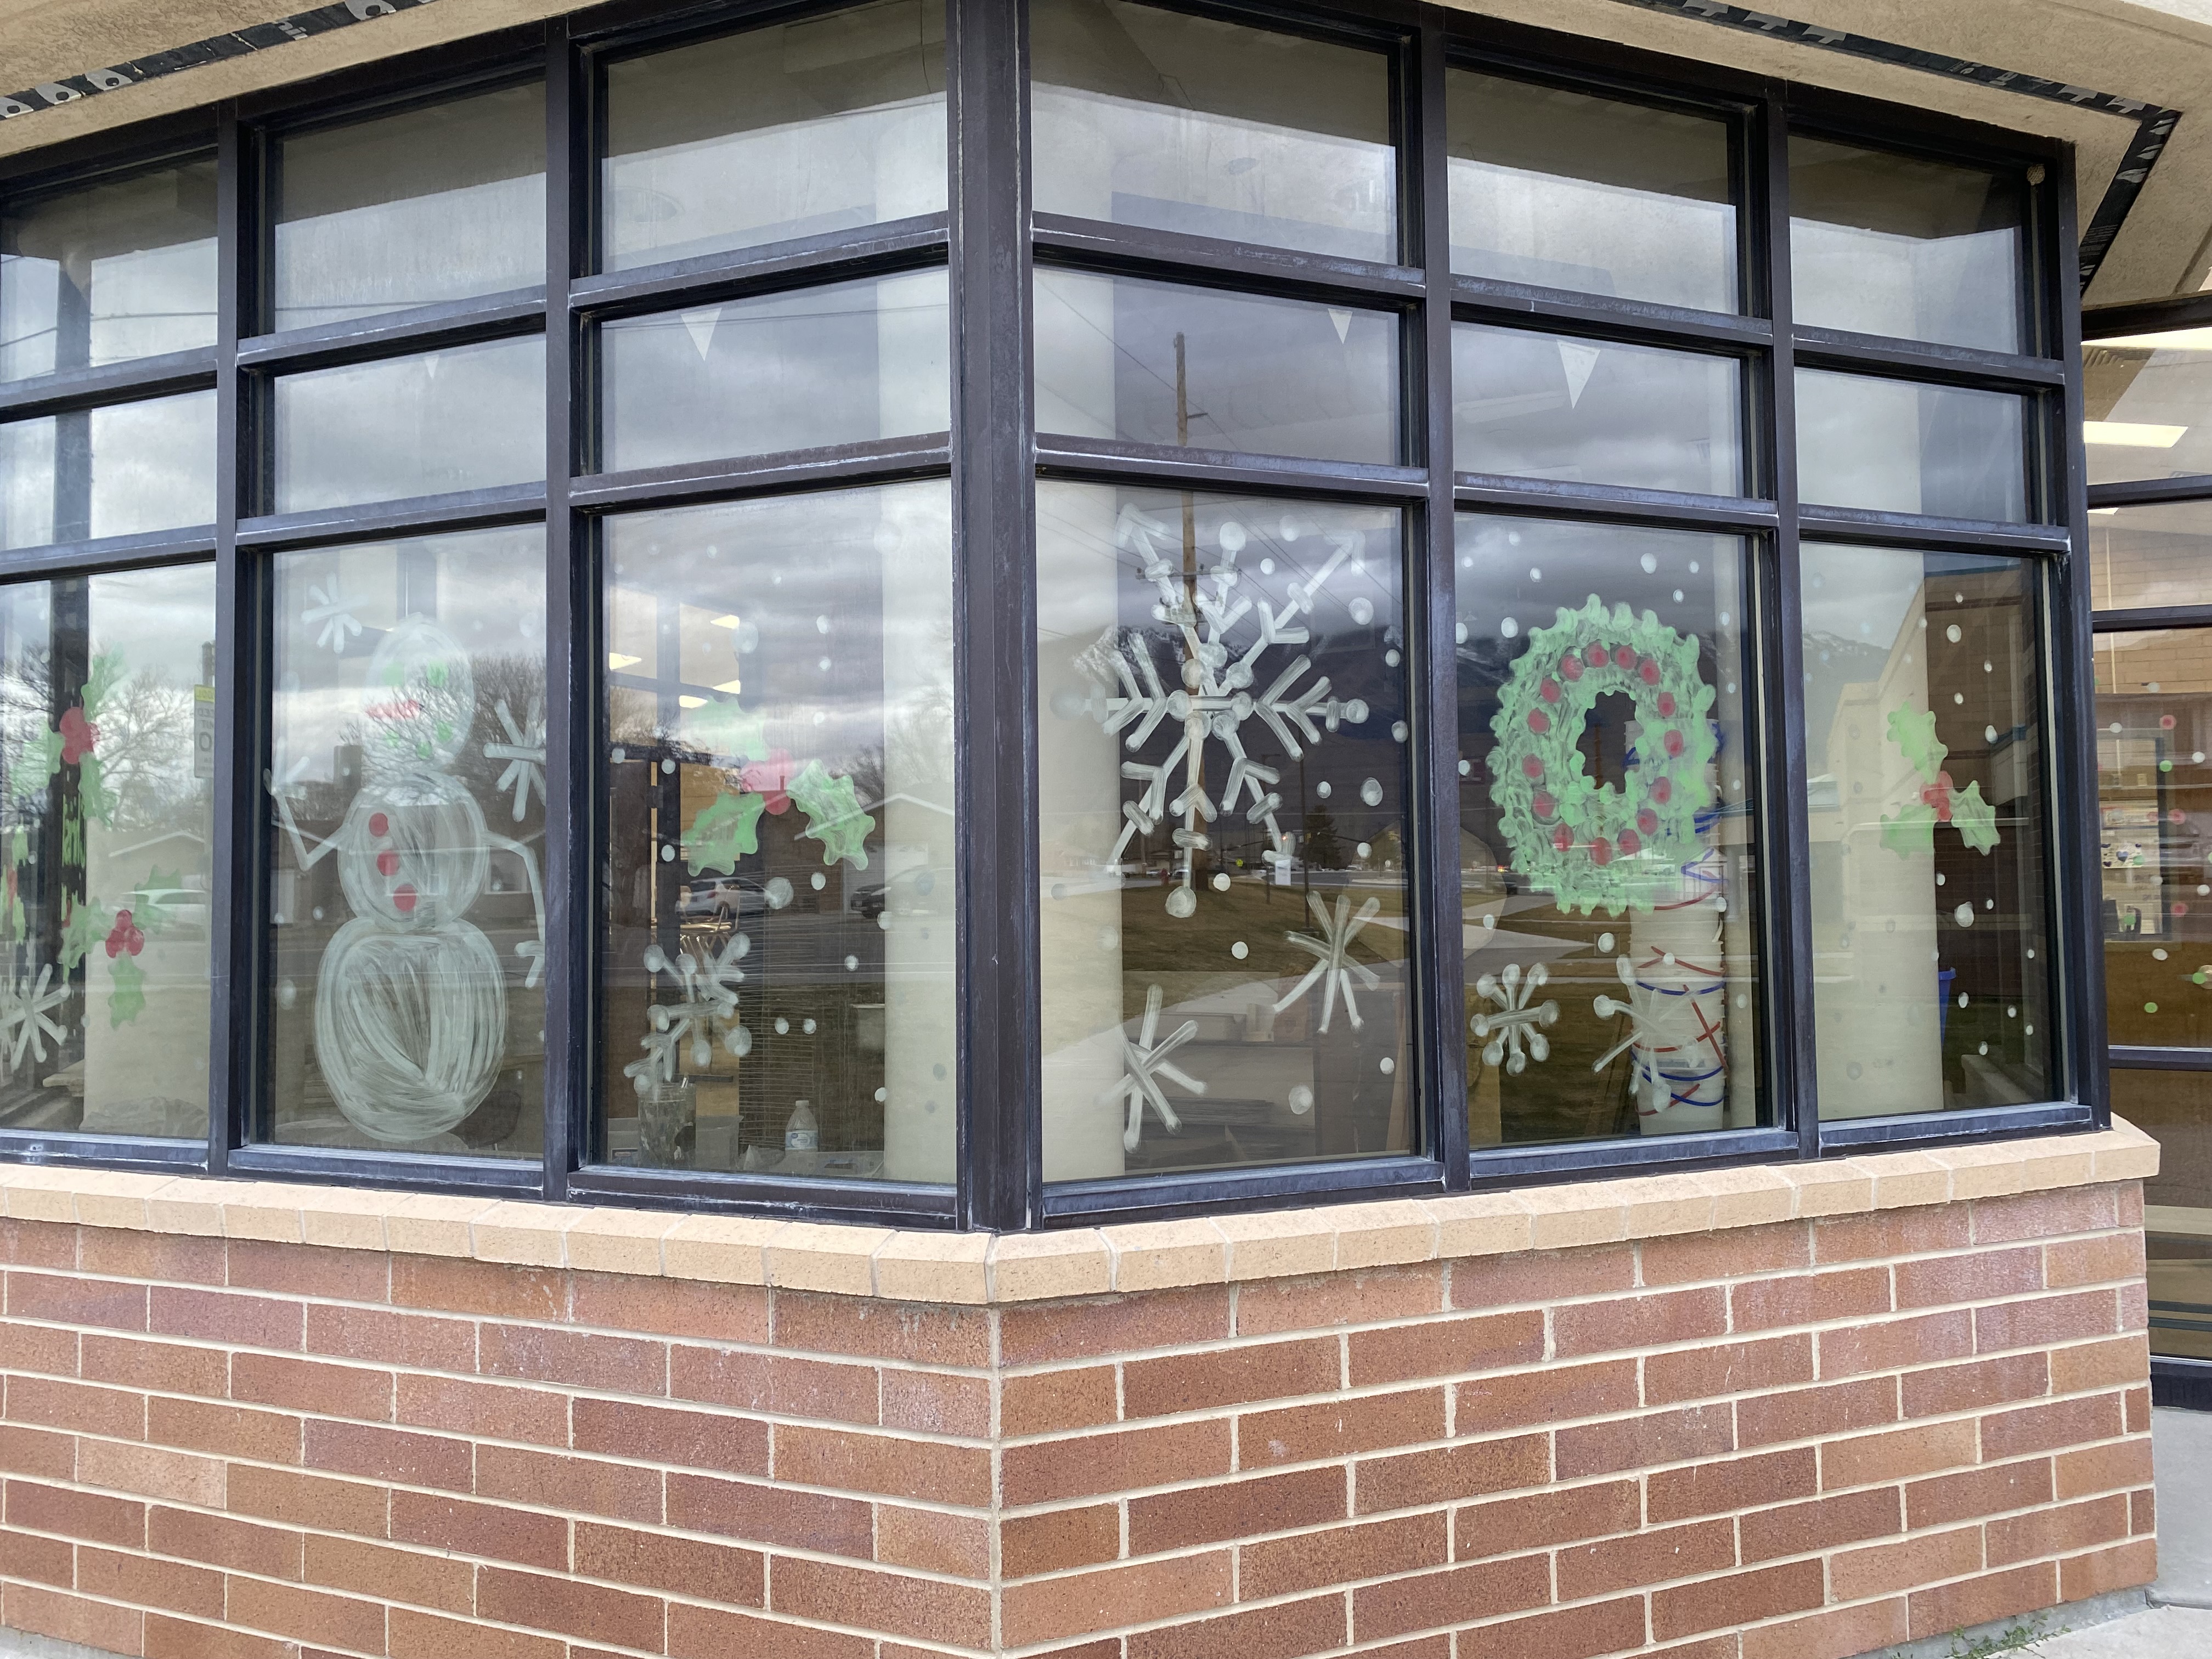 windows painted with Christmas decorations